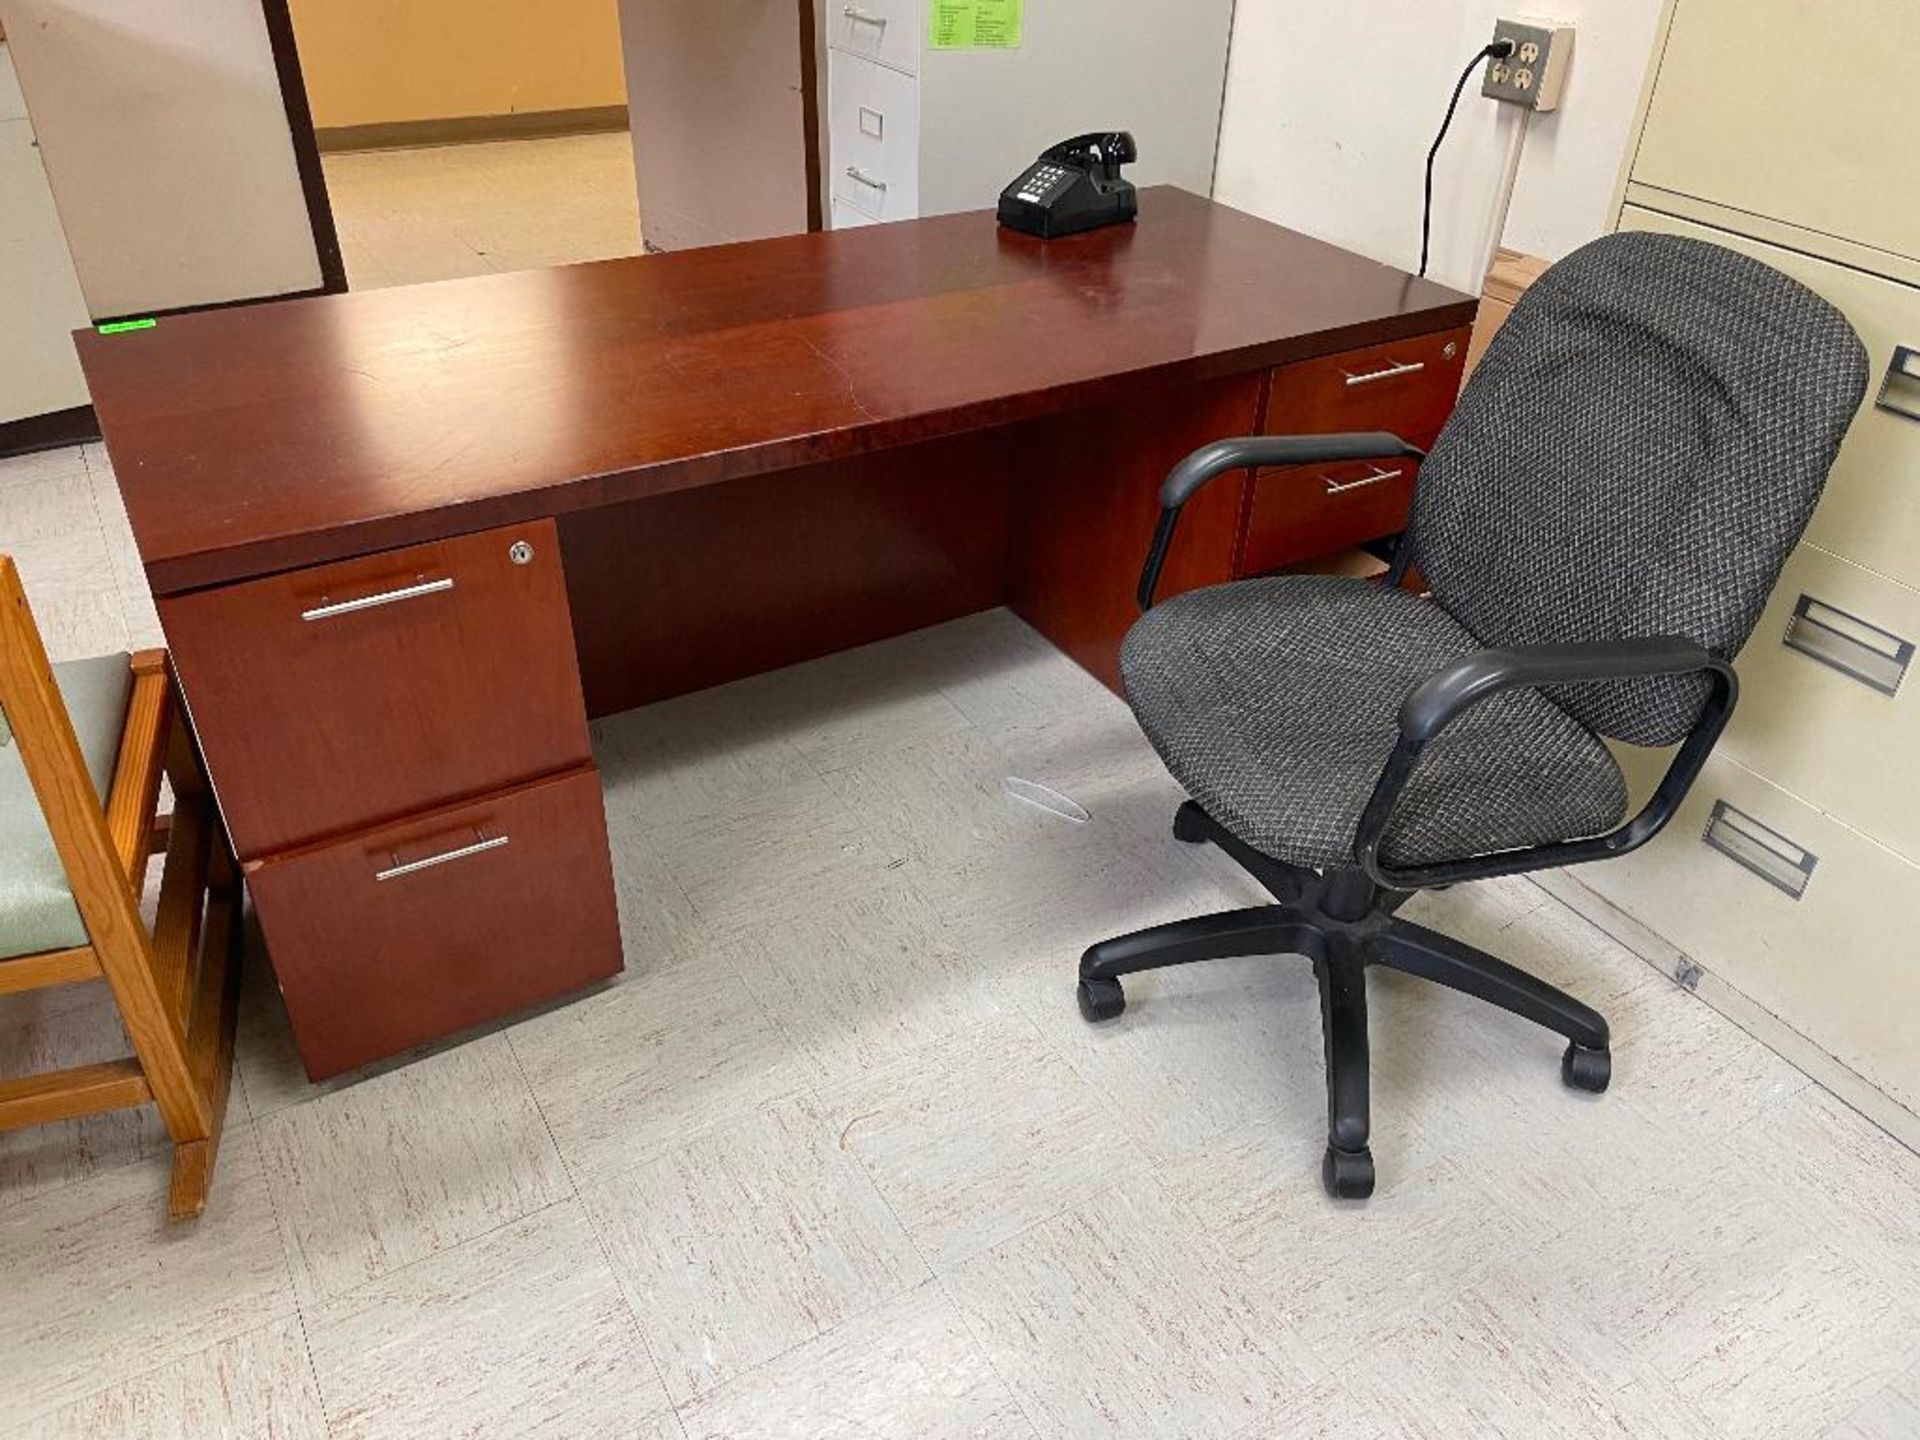 DESCRIPTION: CHERRY LAMINATE DESK, OFFICE CHAIR, AND FOUR DRAWER METAL FILE CABINET, ADDITIONAL INFO - Image 2 of 3